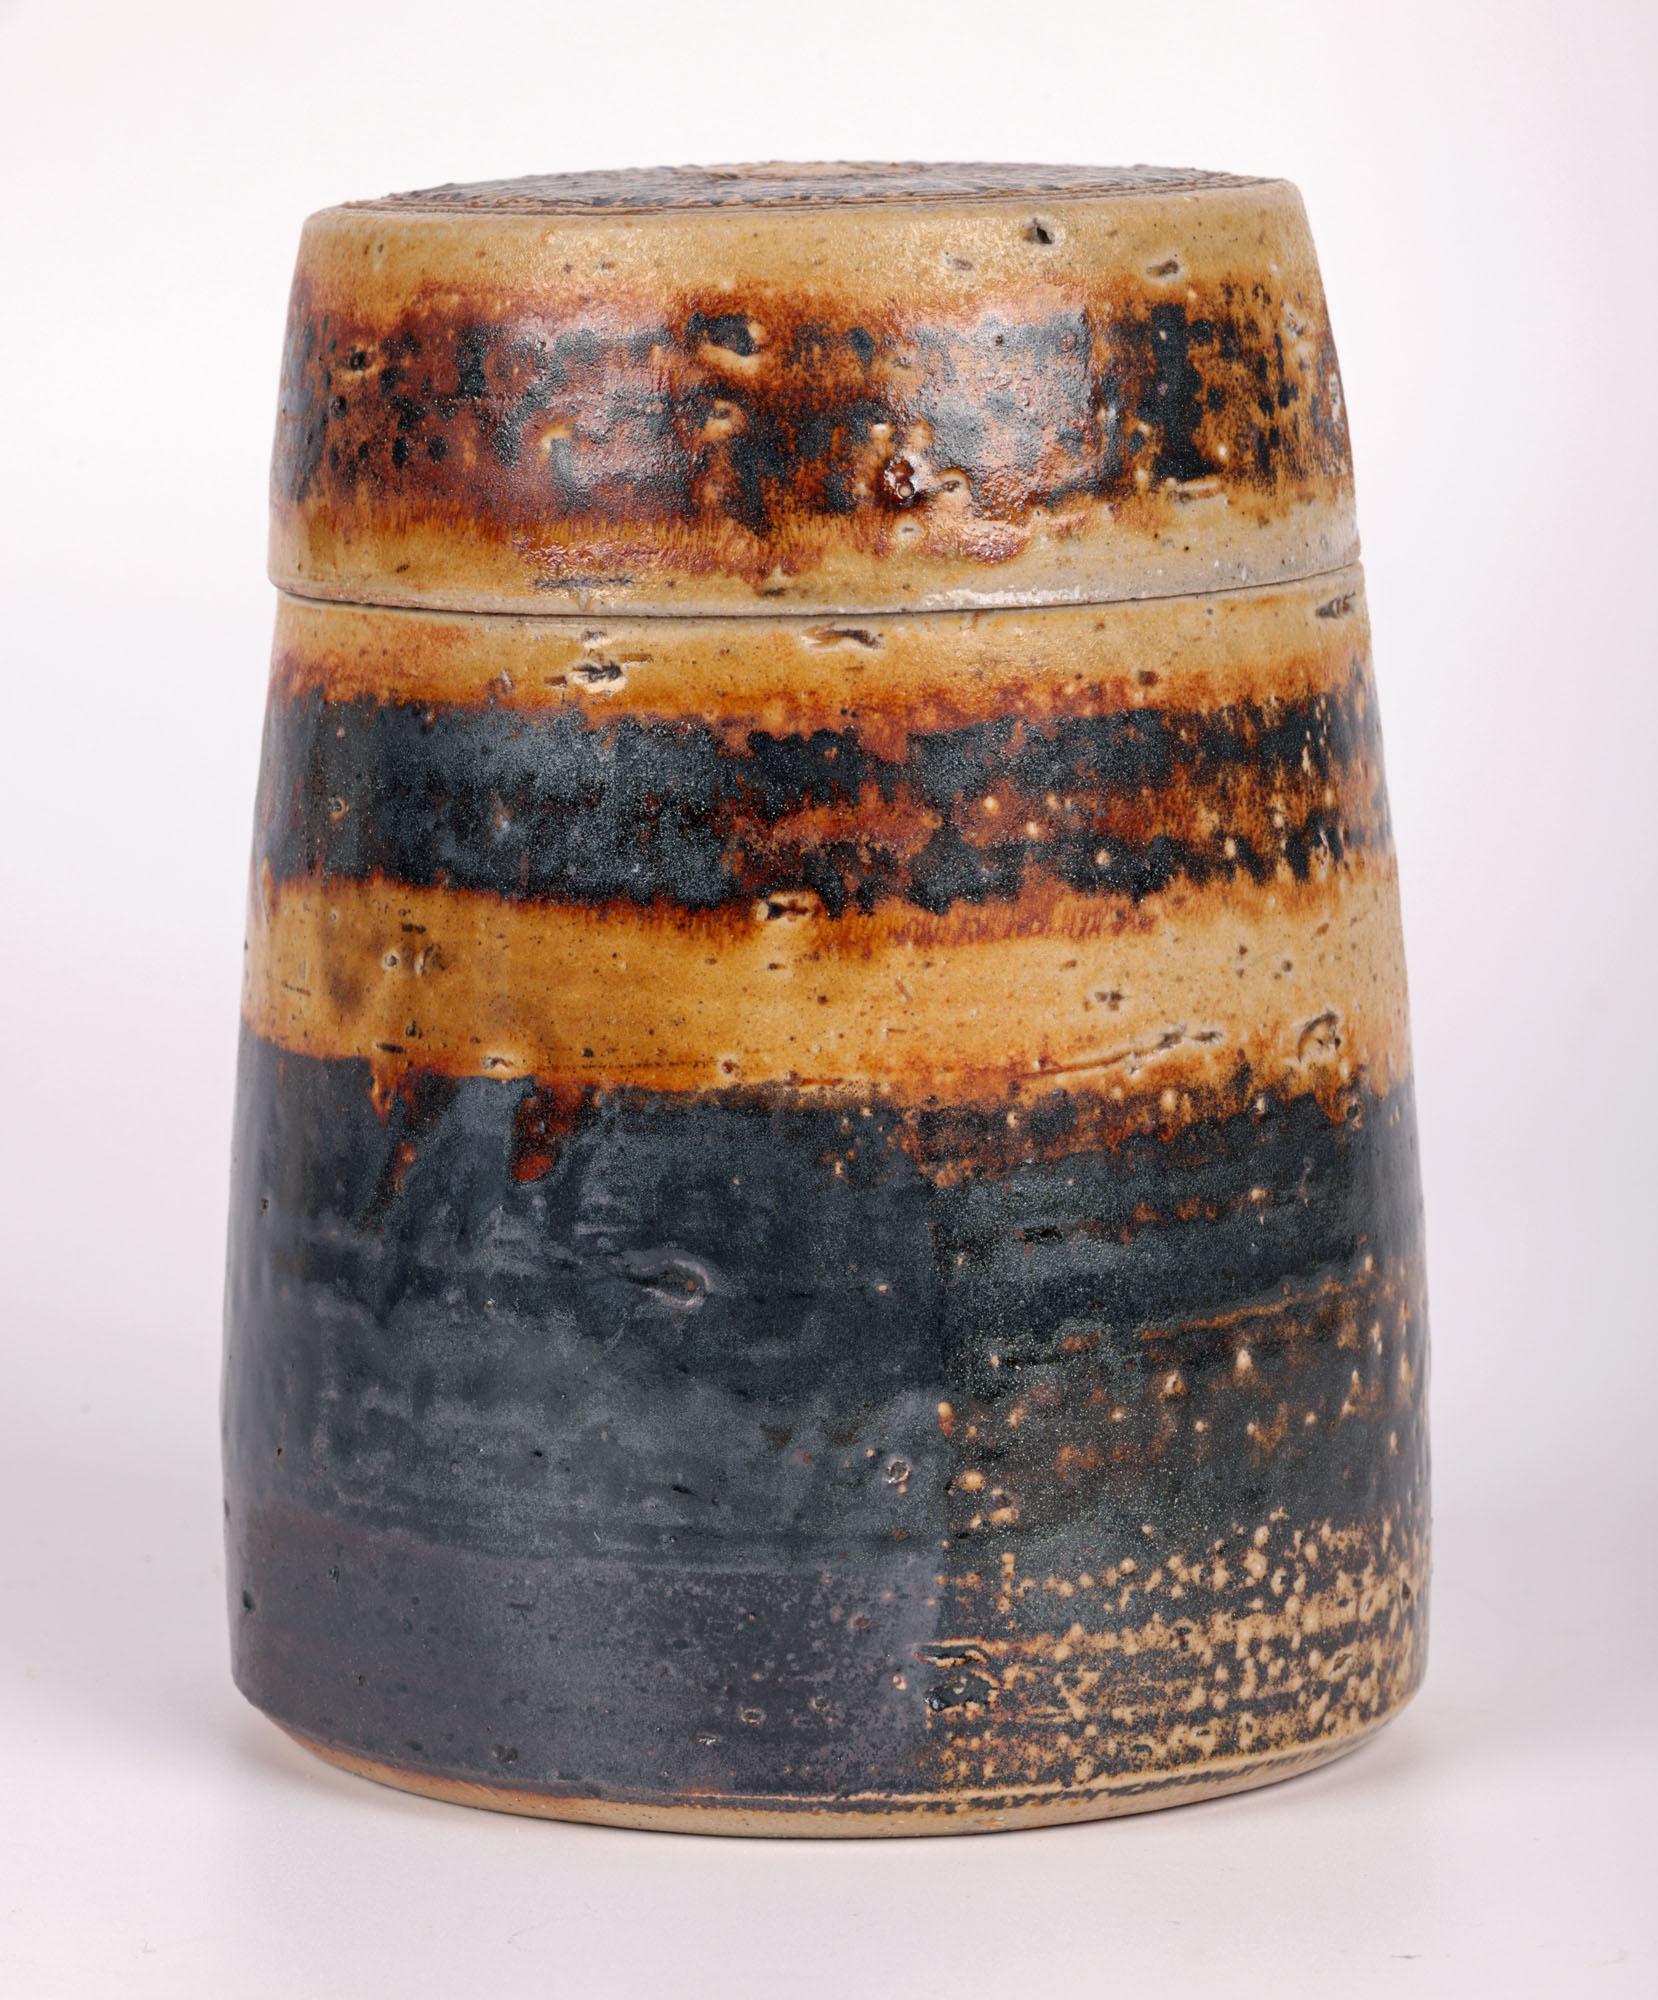 A fine vintage British studio pottery lidded vessel by renowned potter Micki Schloessingk (b. 1949) and made in Swansea, Wales. The stoneware vessel is of tall slightly graduated cylindrical shape with a flat top round cover and is decorated in